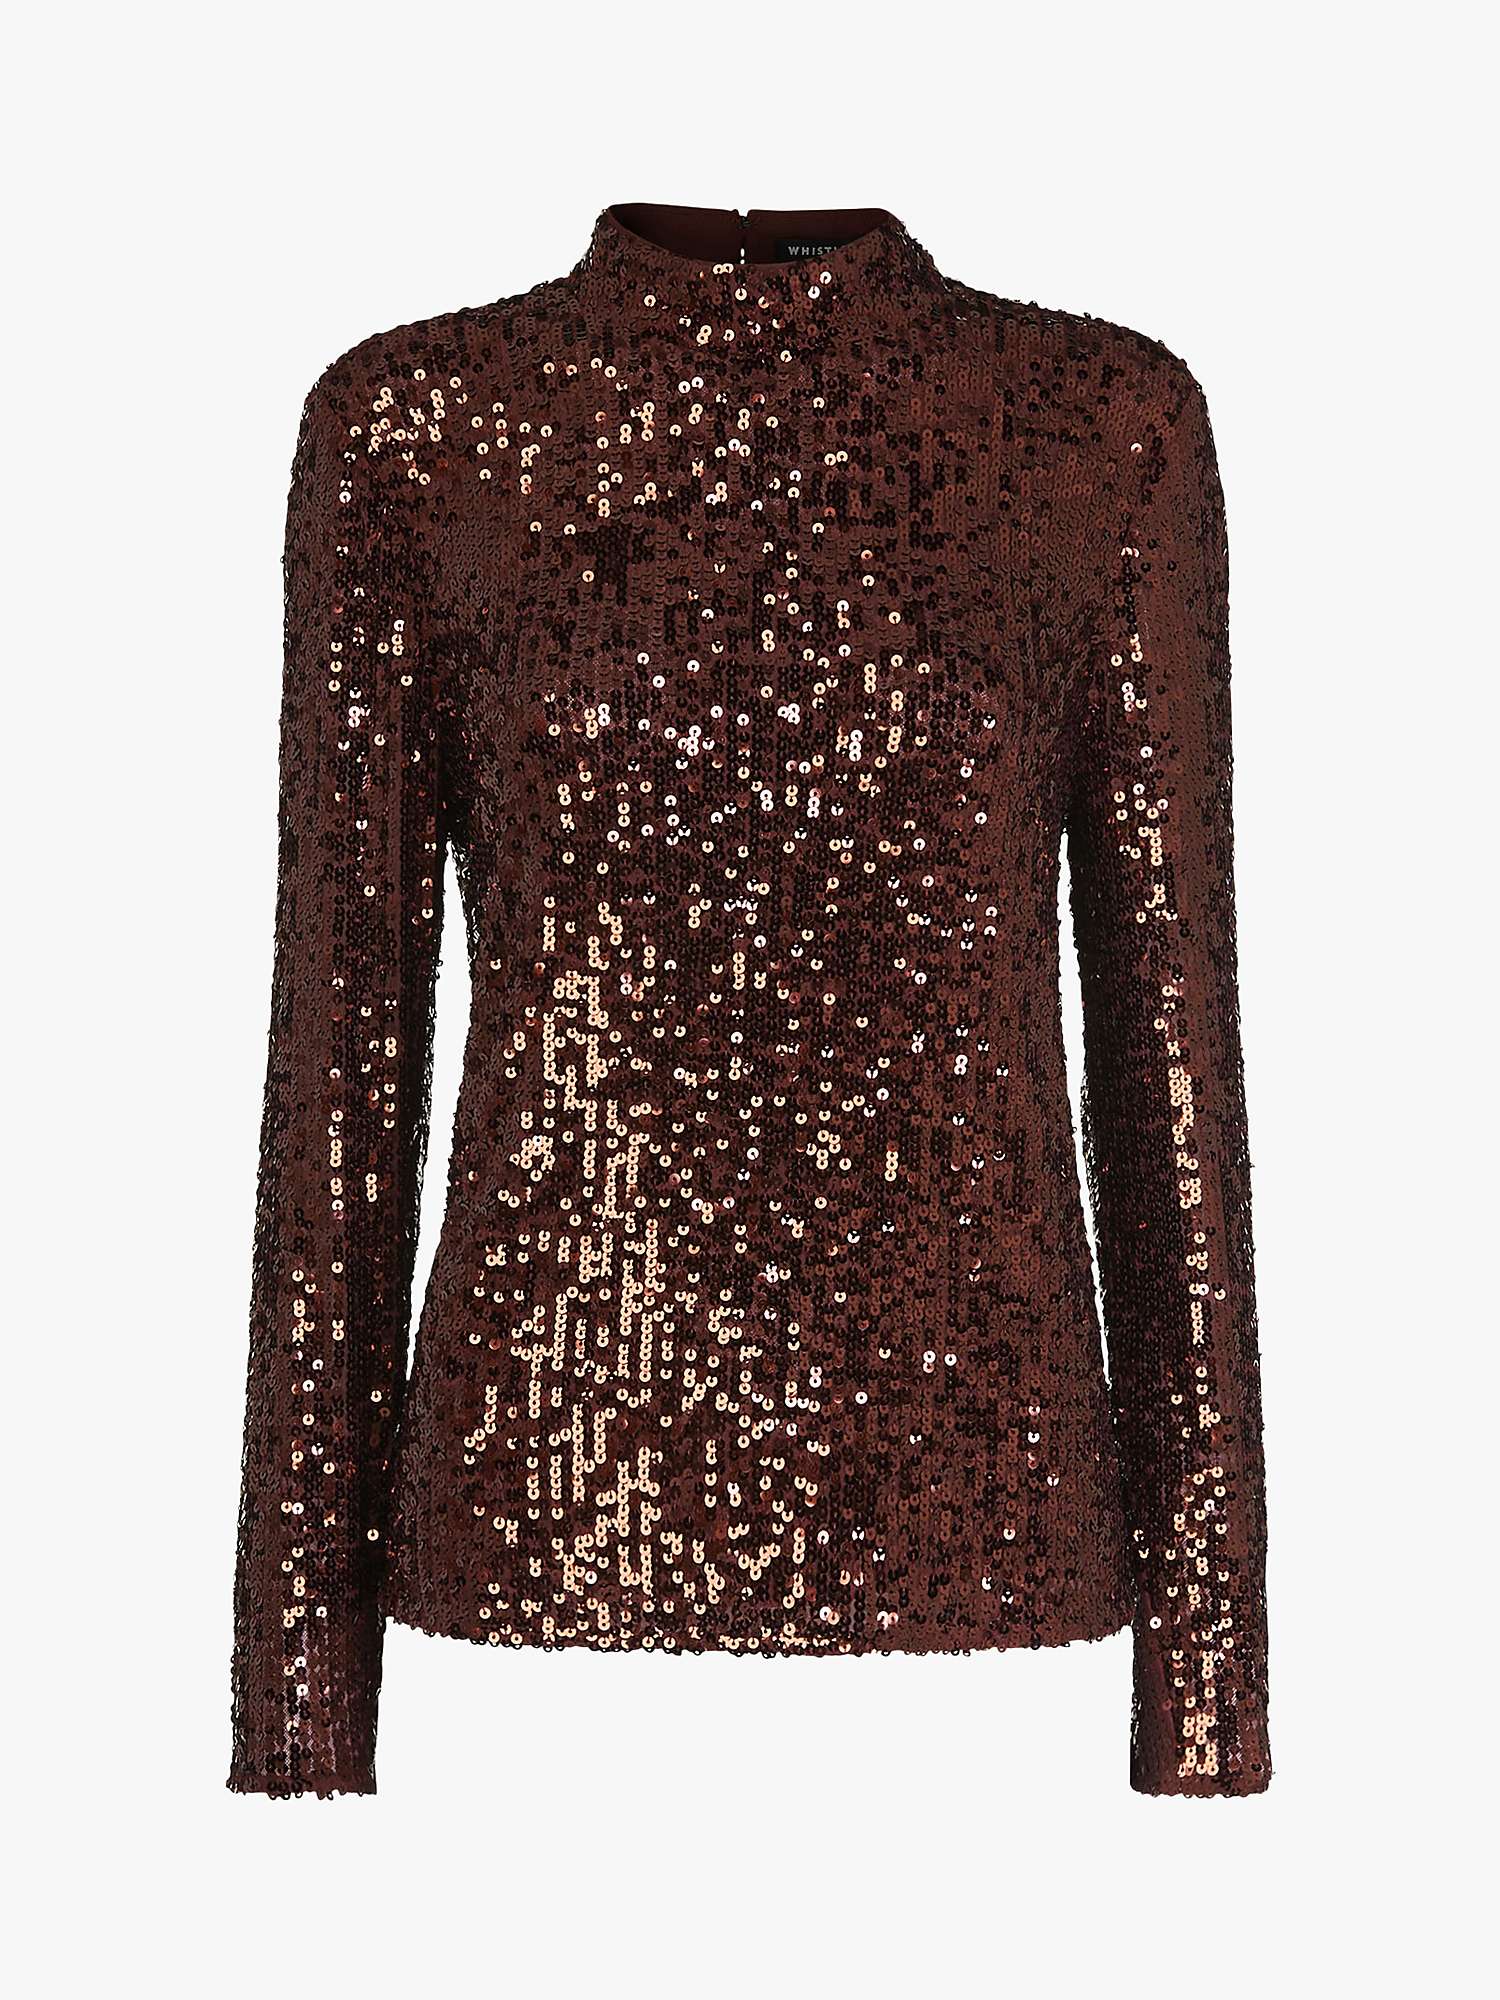 Whistles High Neck Sequin Top, Chocolate at John Lewis & Partners